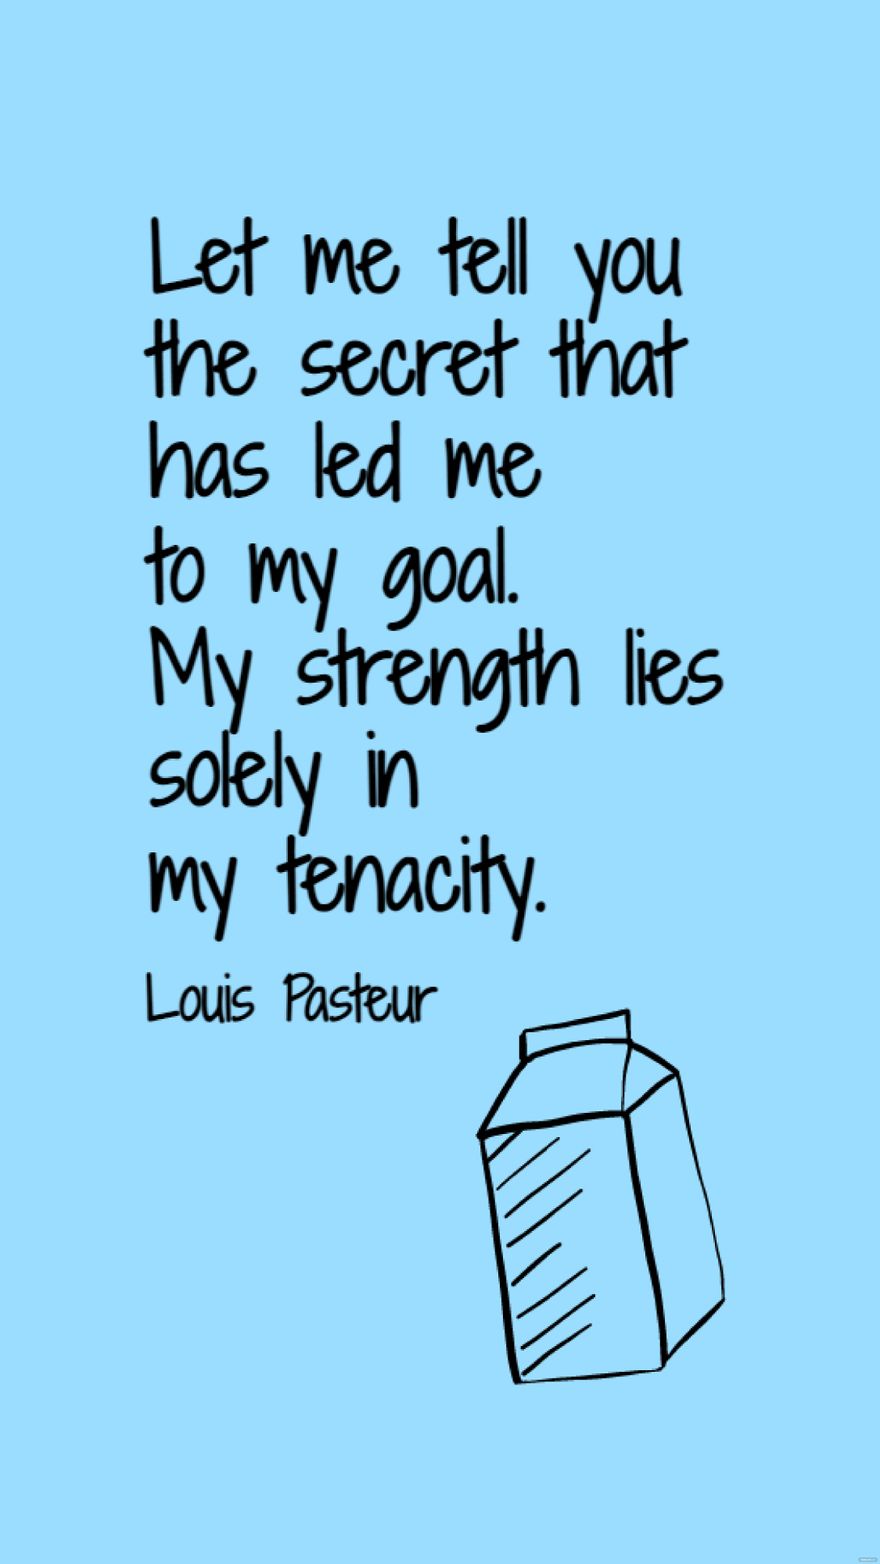 Louis Pasteur - Let me tell you the secret that has led me to my goal. My strength lies solely in my tenacity.